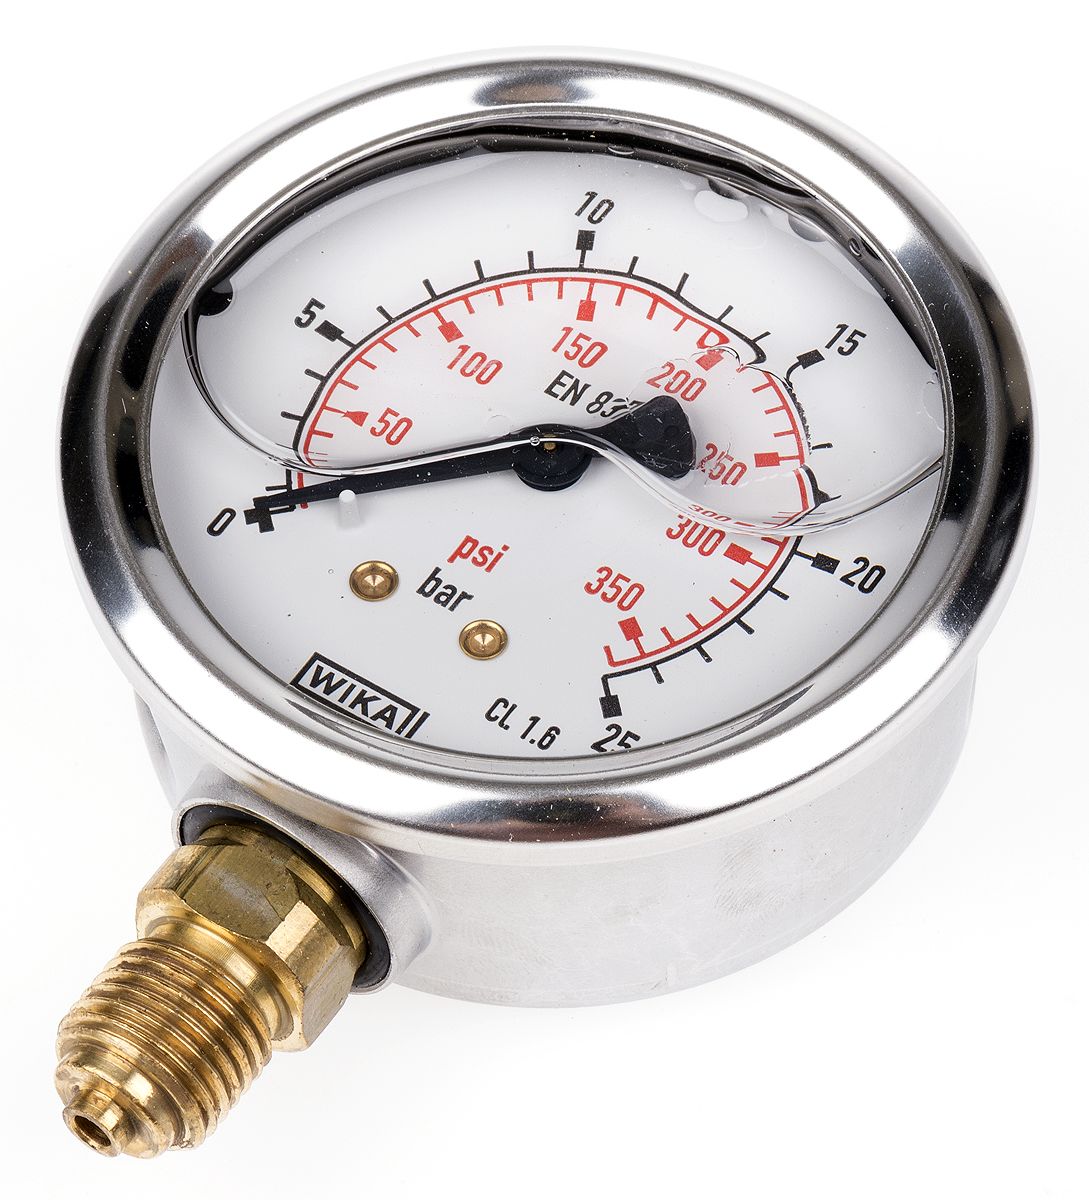 WIKA 9626918 Analogue Positive Pressure Gauge Bottom Entry 25bar, Connection Size G 1/4